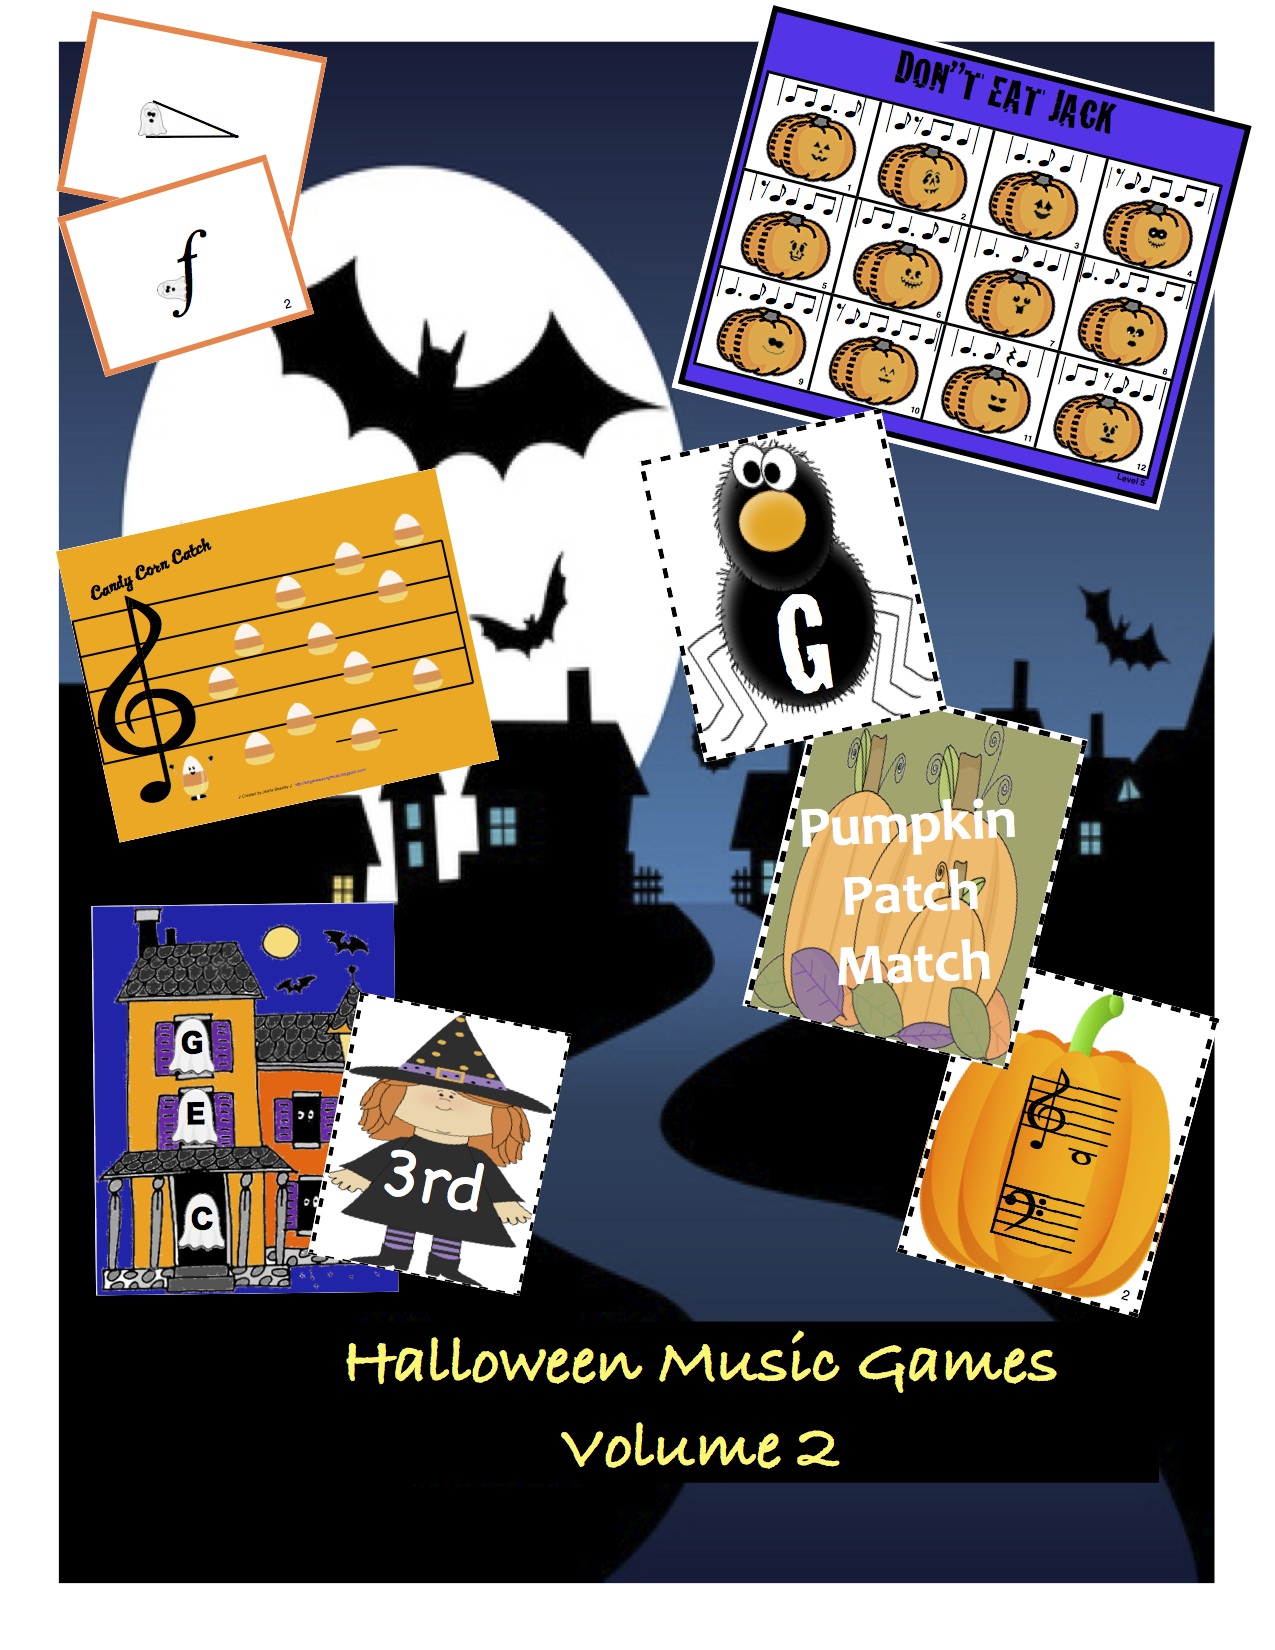 Check out Halloween Music Games Vol.1 for even more games and ...